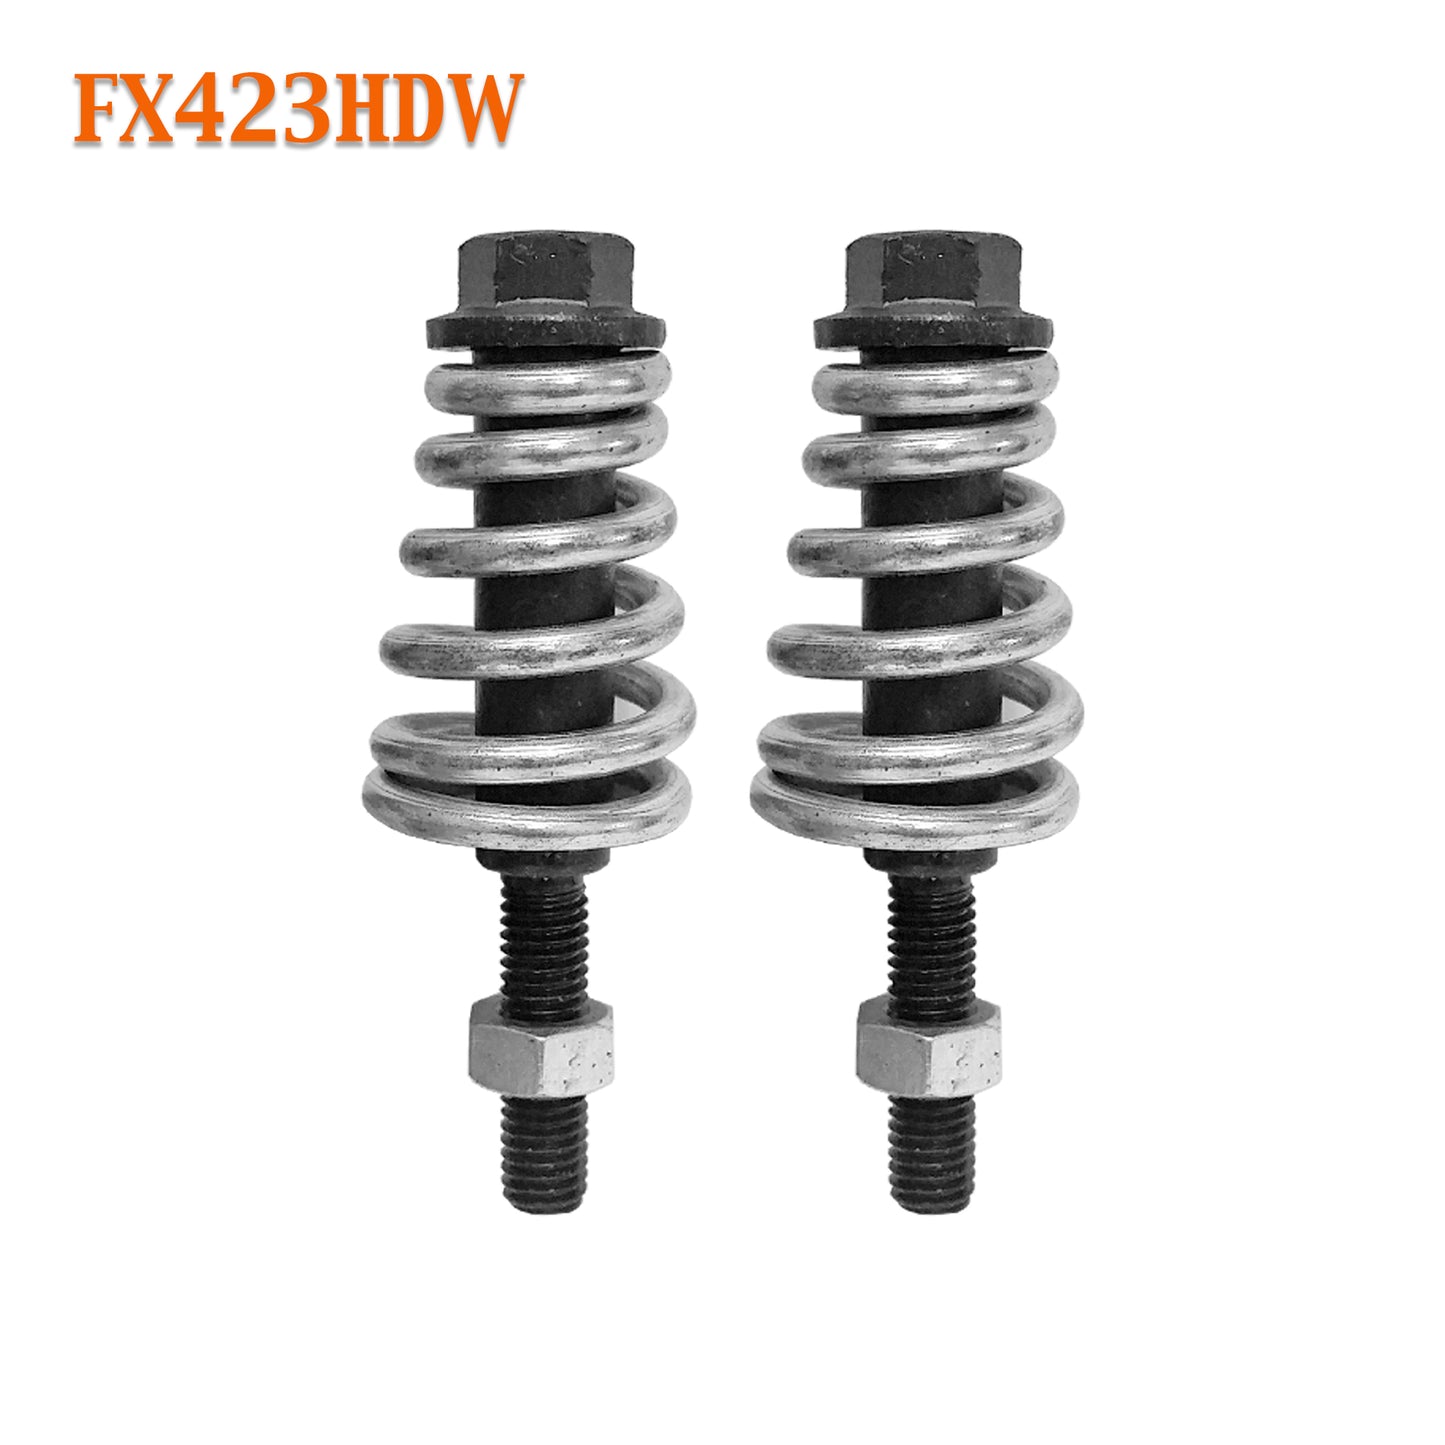 FX423HDW Exhaust Spring Bolt Stud & Nut Hardware Repair Replacement Kit